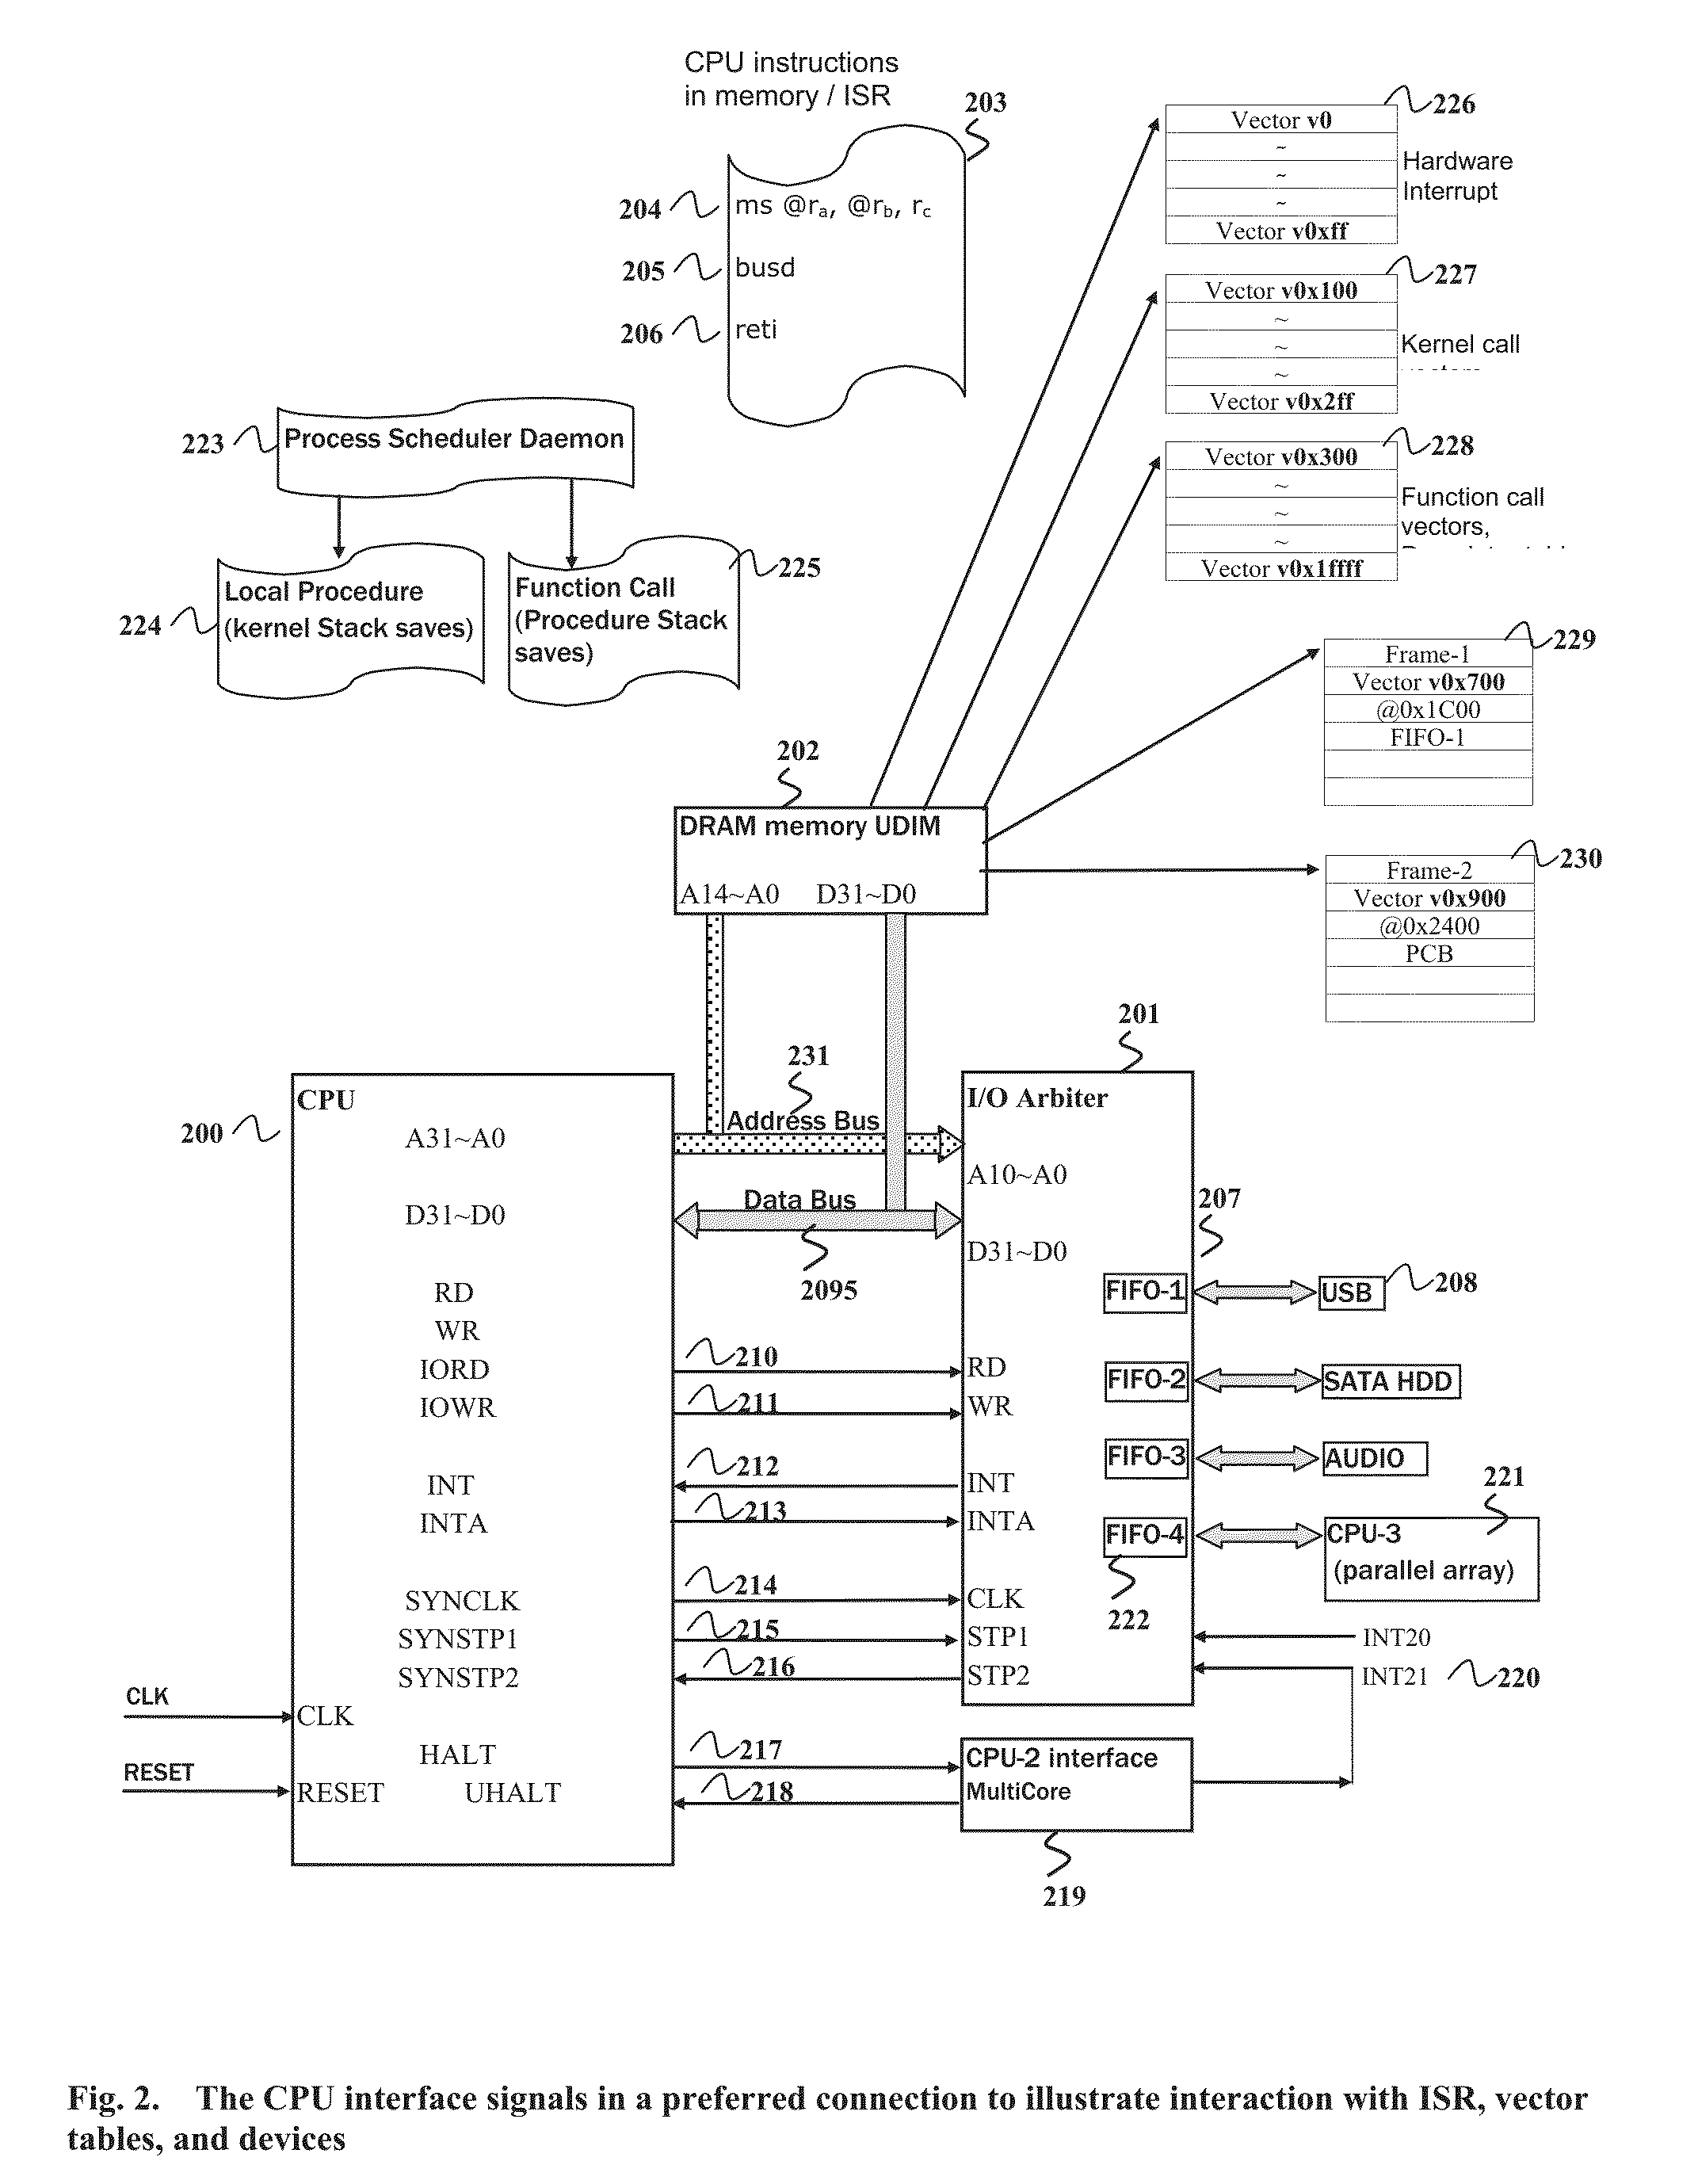 Processor model using a single large linear registers, with new interfacing signals supporting fifo-base I/O ports, and interrupt-driven burst transfers eliminating dma, bridges, and external I/O bus